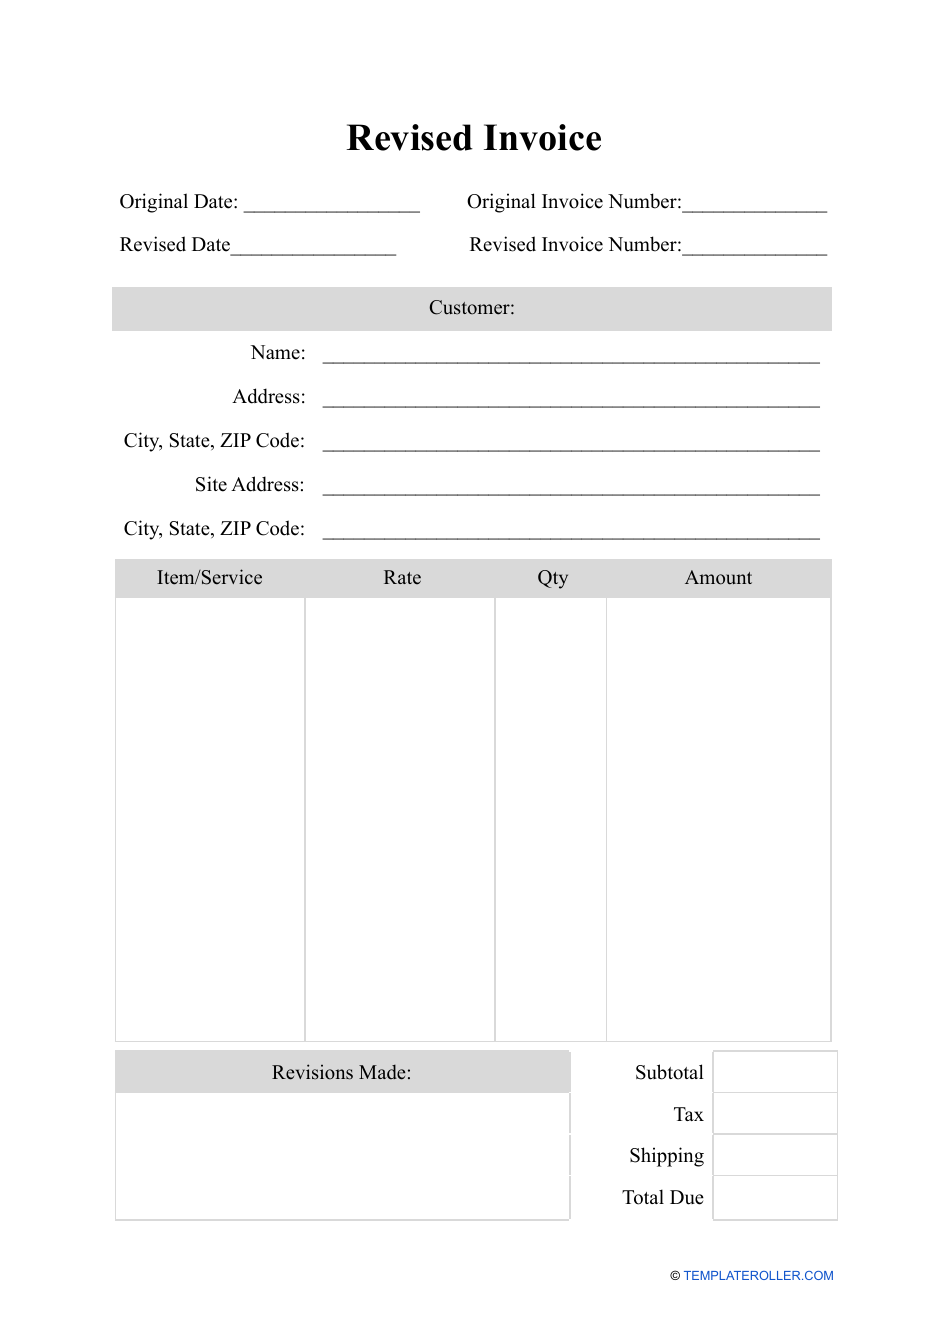 Revised Invoice Template, Page 1